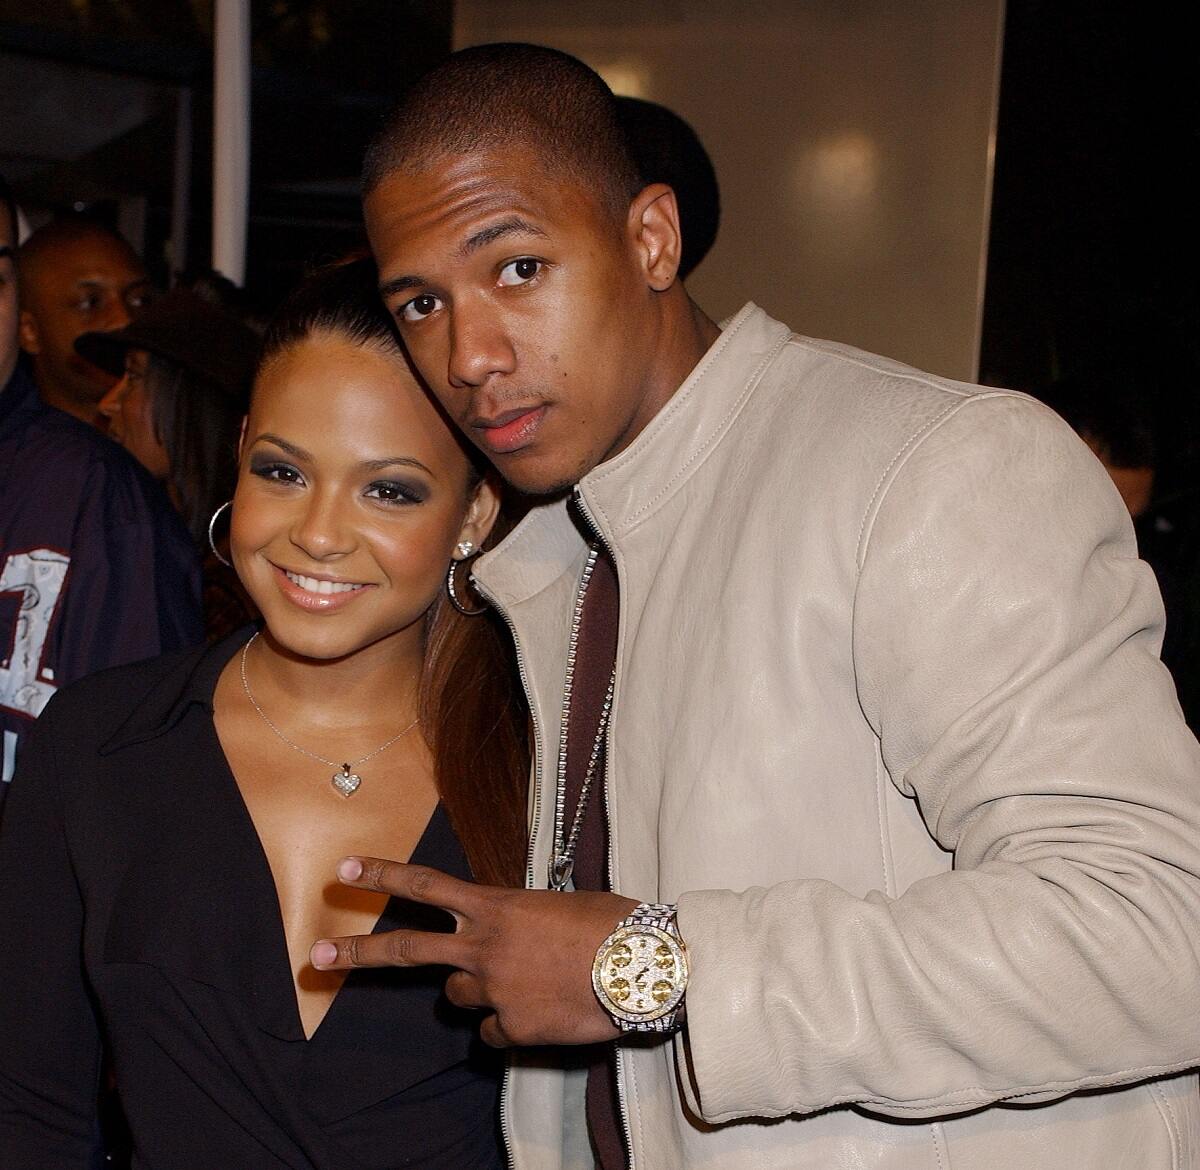 Christina Milian and Nick Cannon appear together at the premiere of 'Ray.' The couple dated from 2003 until 2005